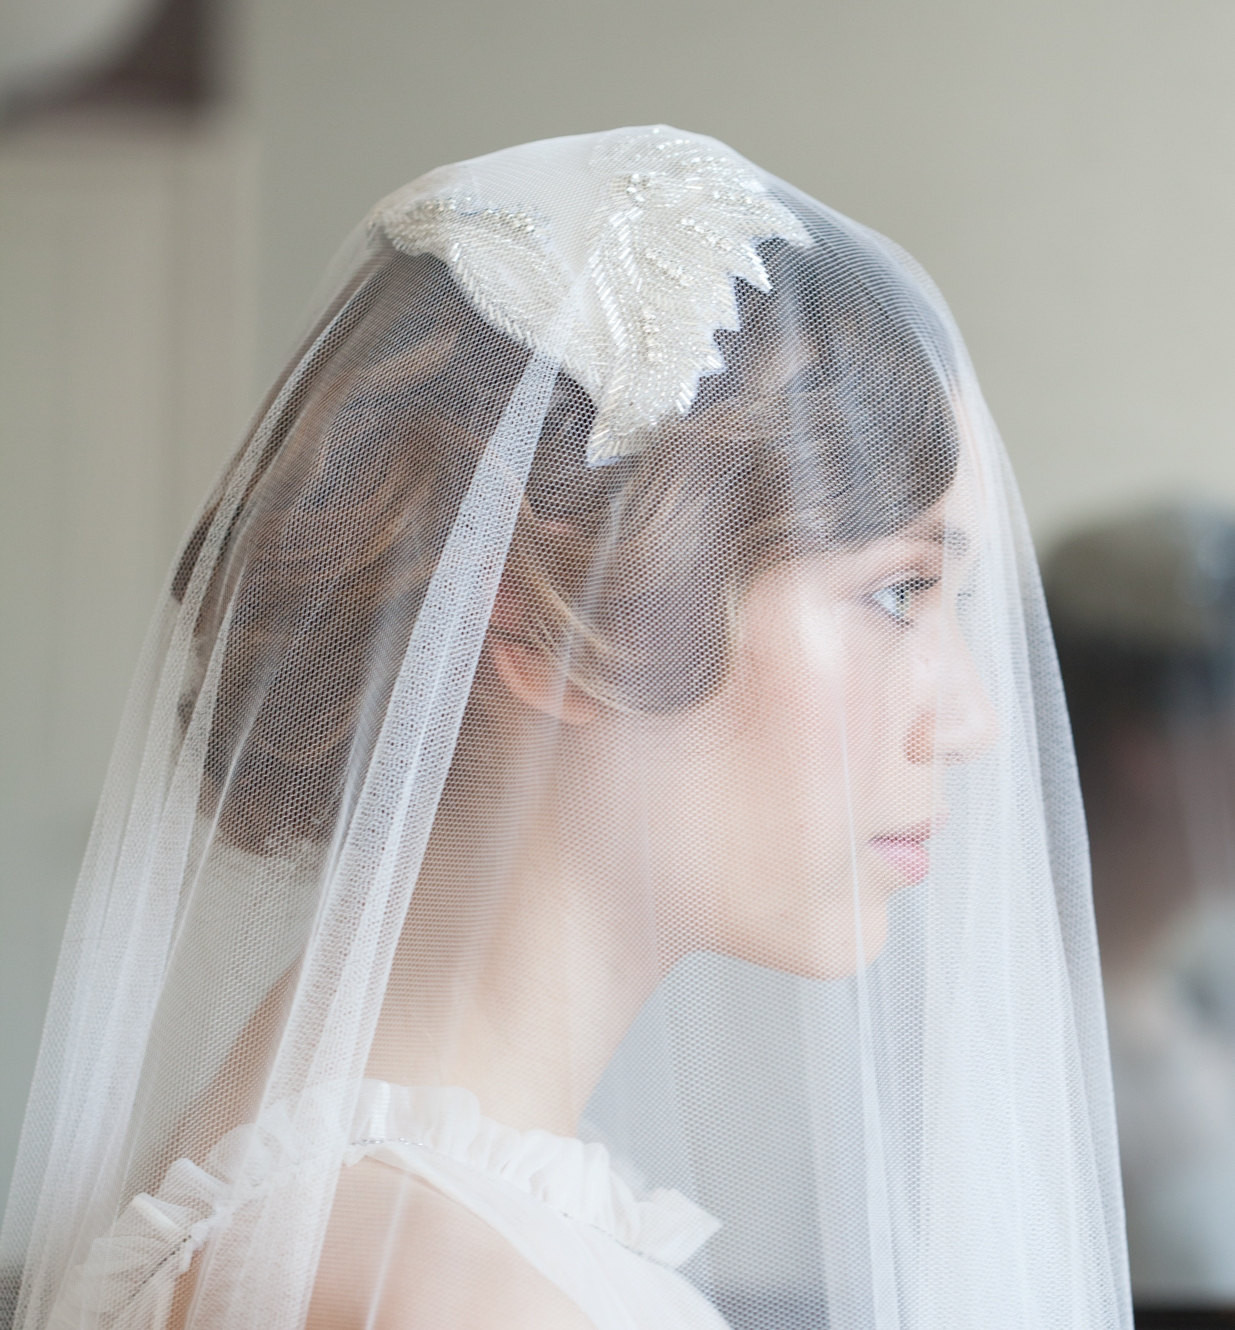 Vintage Wedding Veils And Headpieces
 Wedding Headpiece And Veil Vintage Style Bridal By